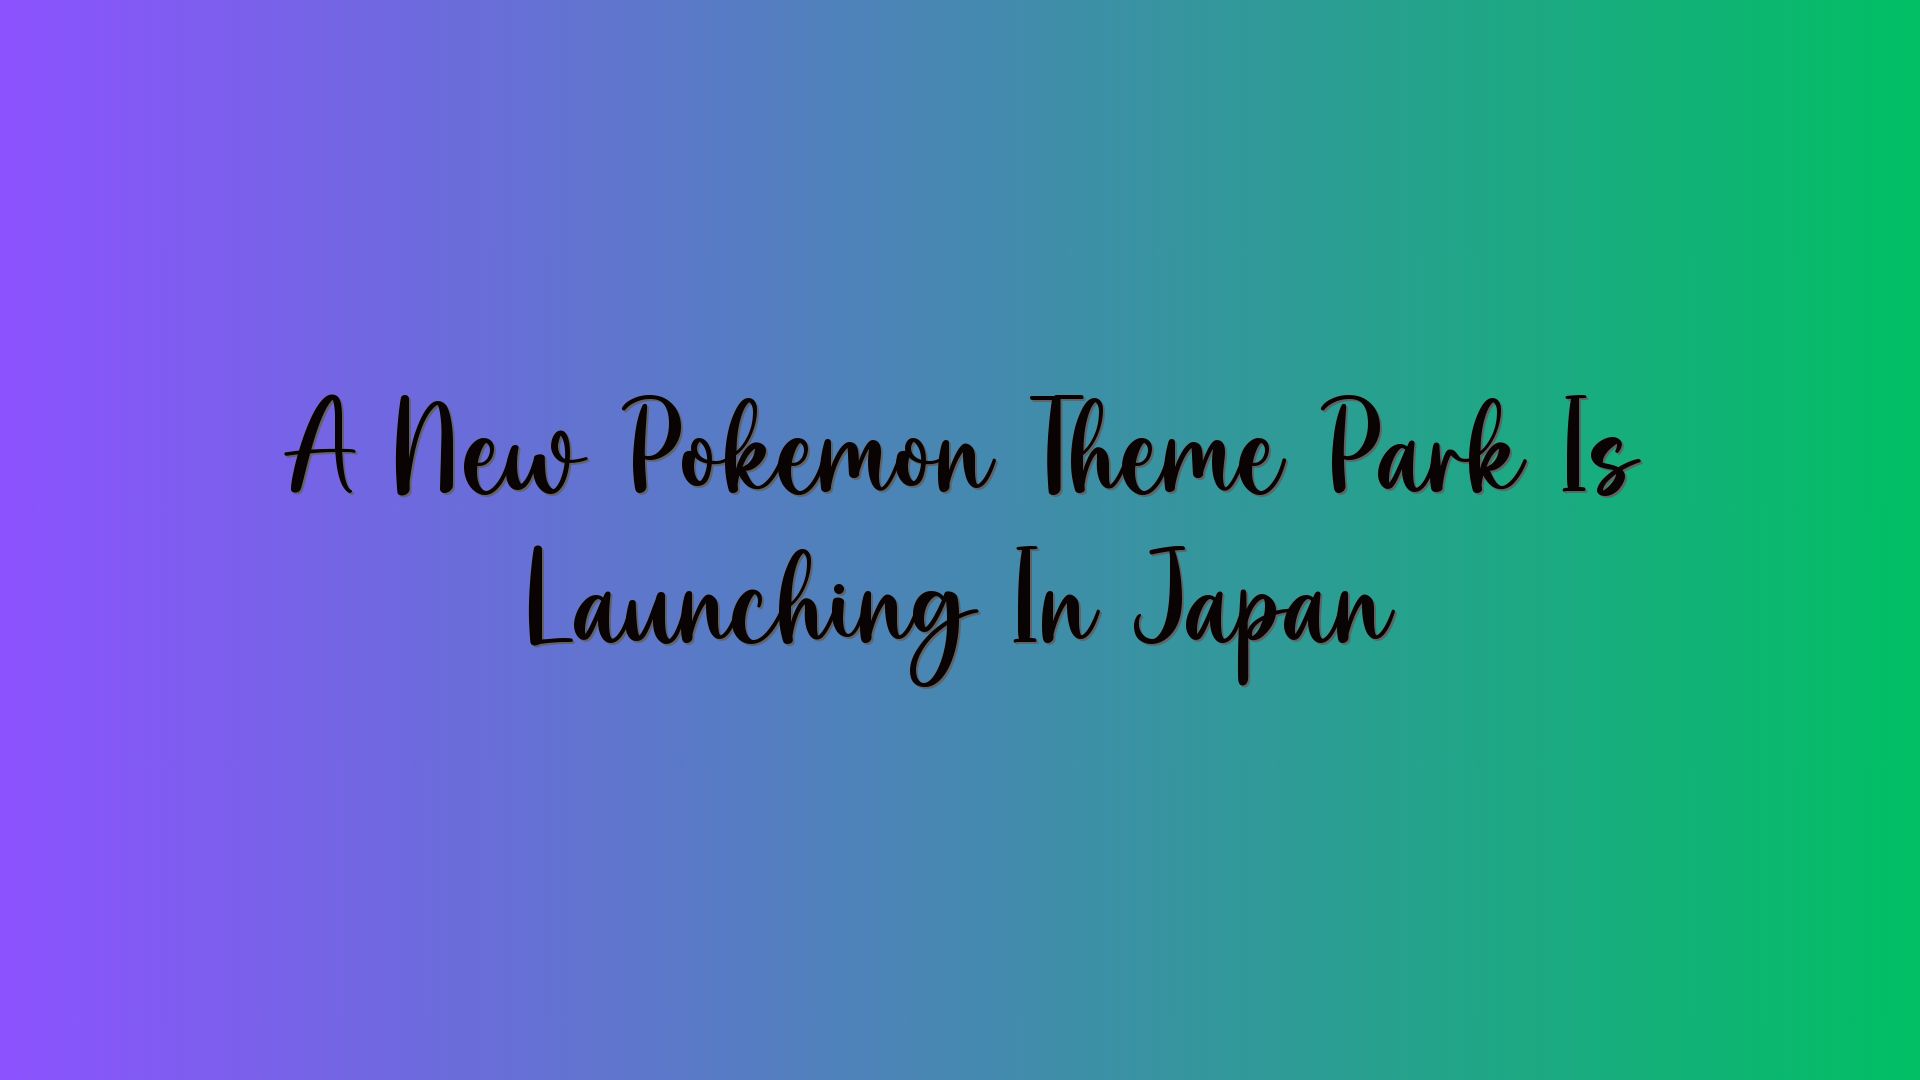 A New Pokémon Theme Park Is Launching In Japan